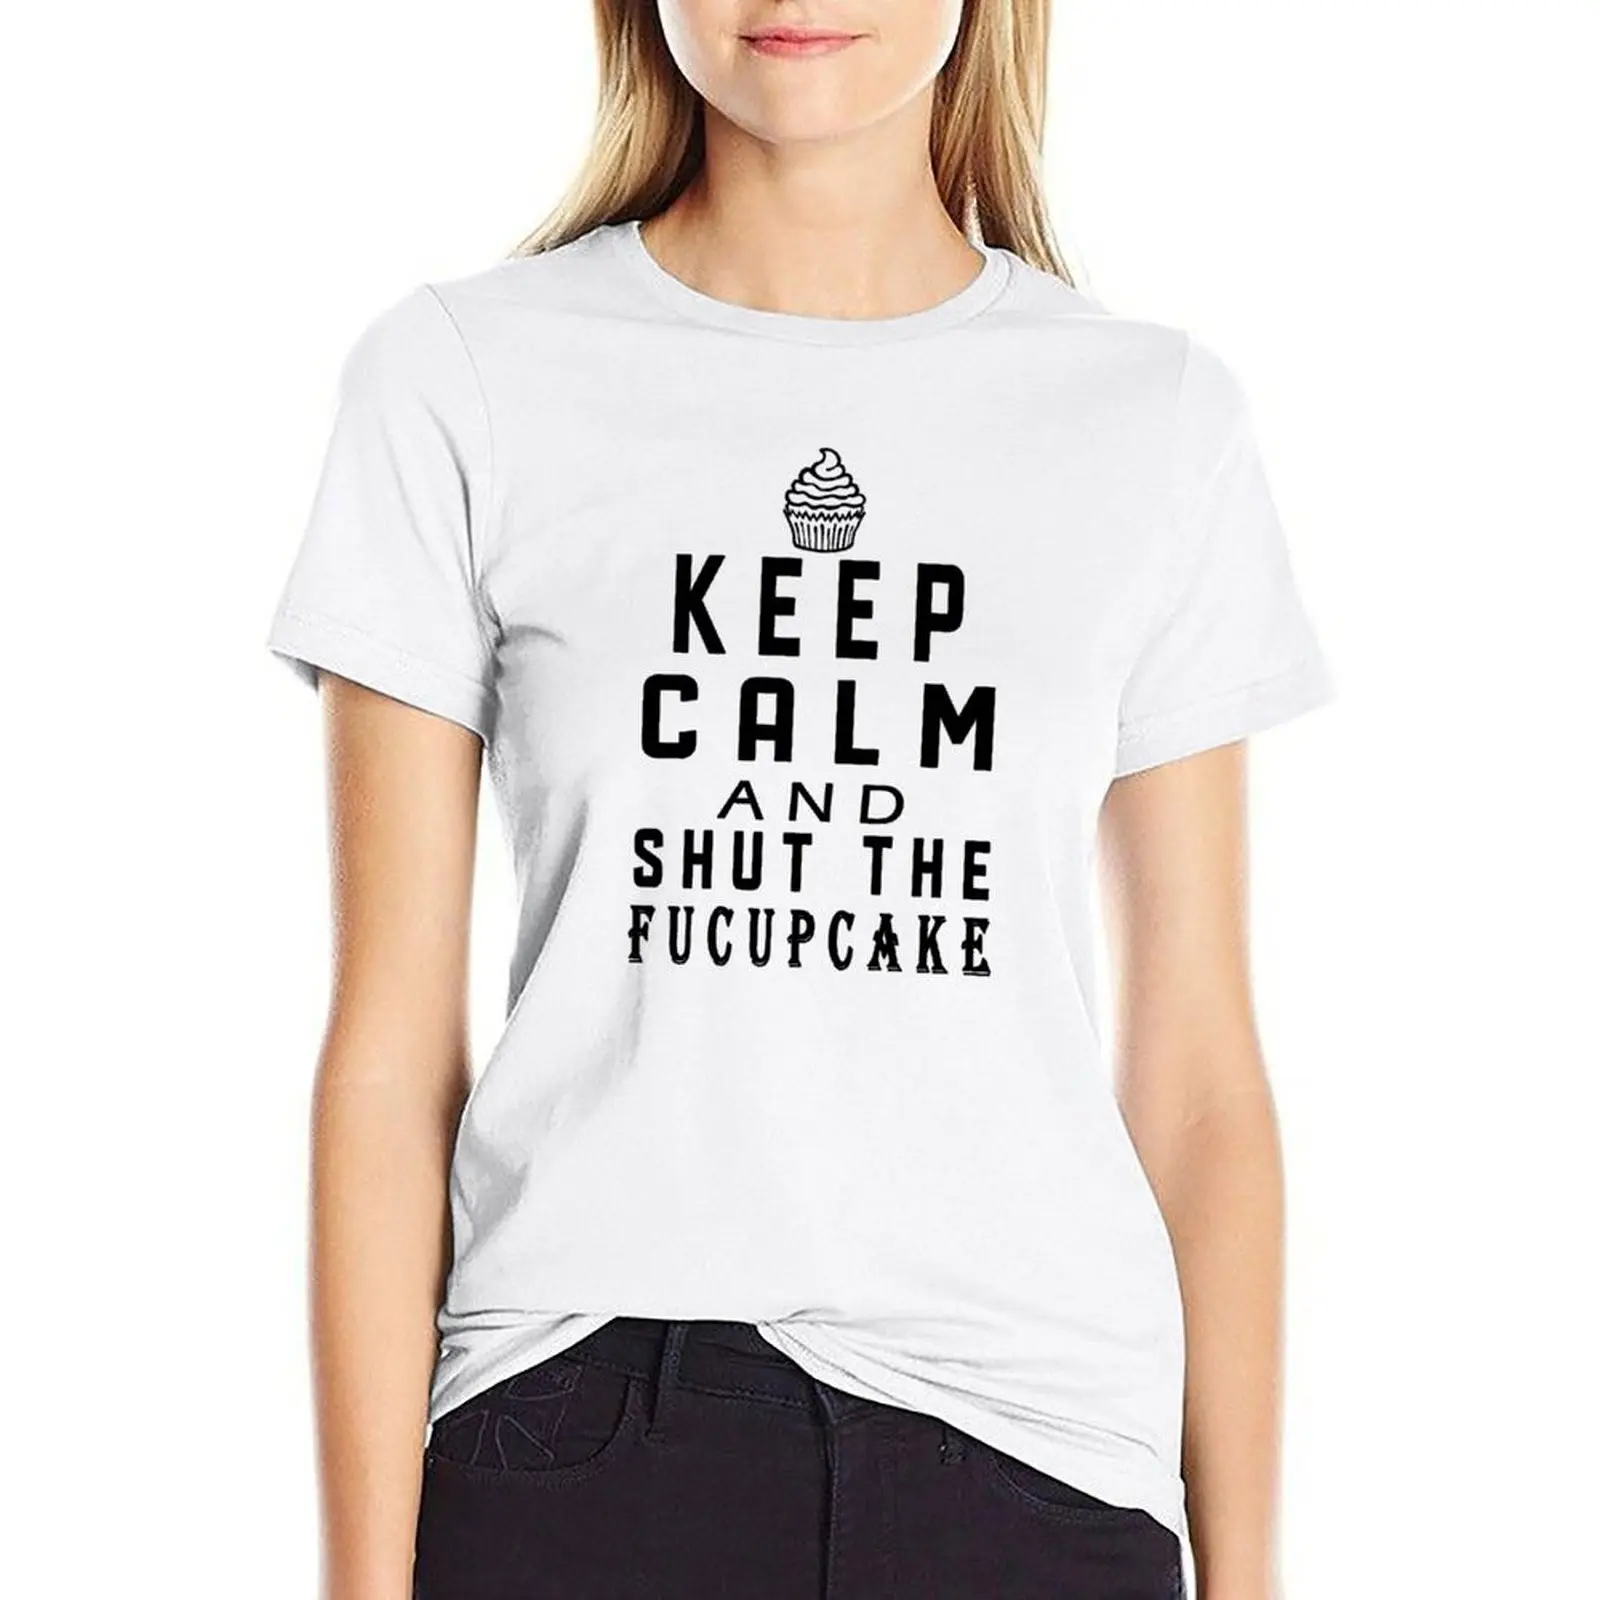 

Keep Calm And Shut The Fucupcake T-shirt shirts graphic tees funny cute tops oversized workout shirts for Women